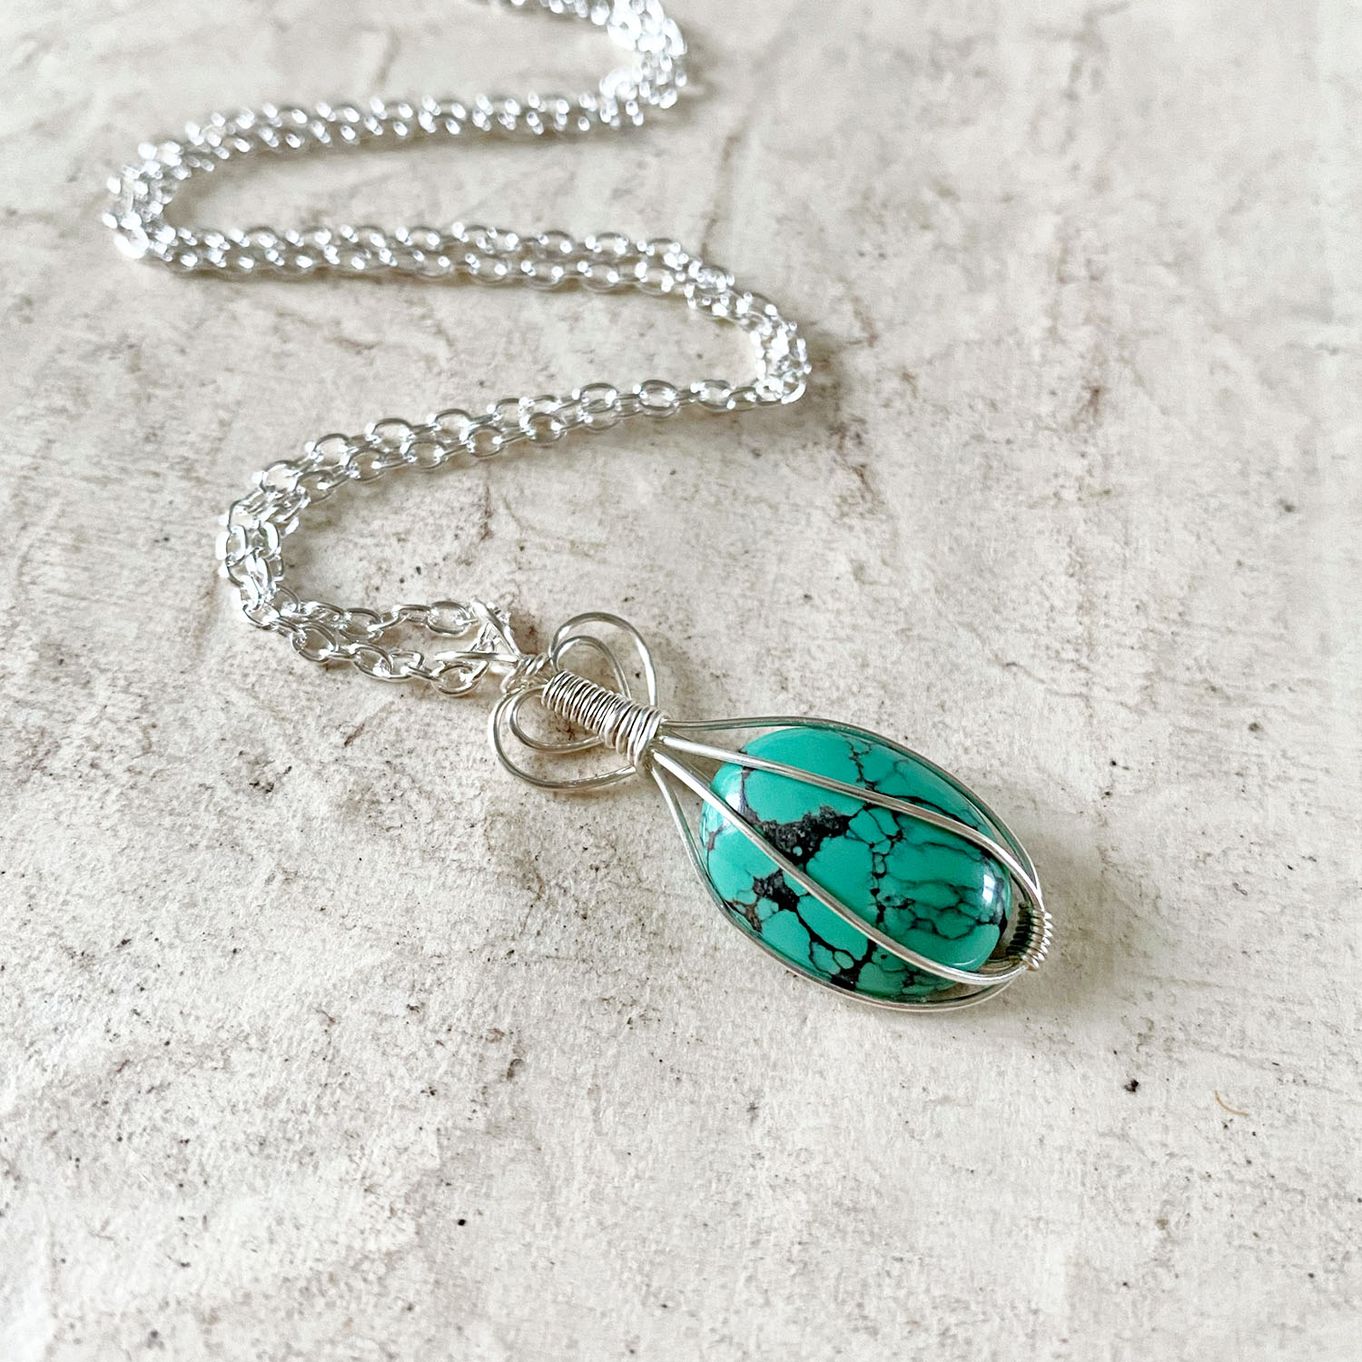 How To Make A Wire Wrapped Cabochon Pendant